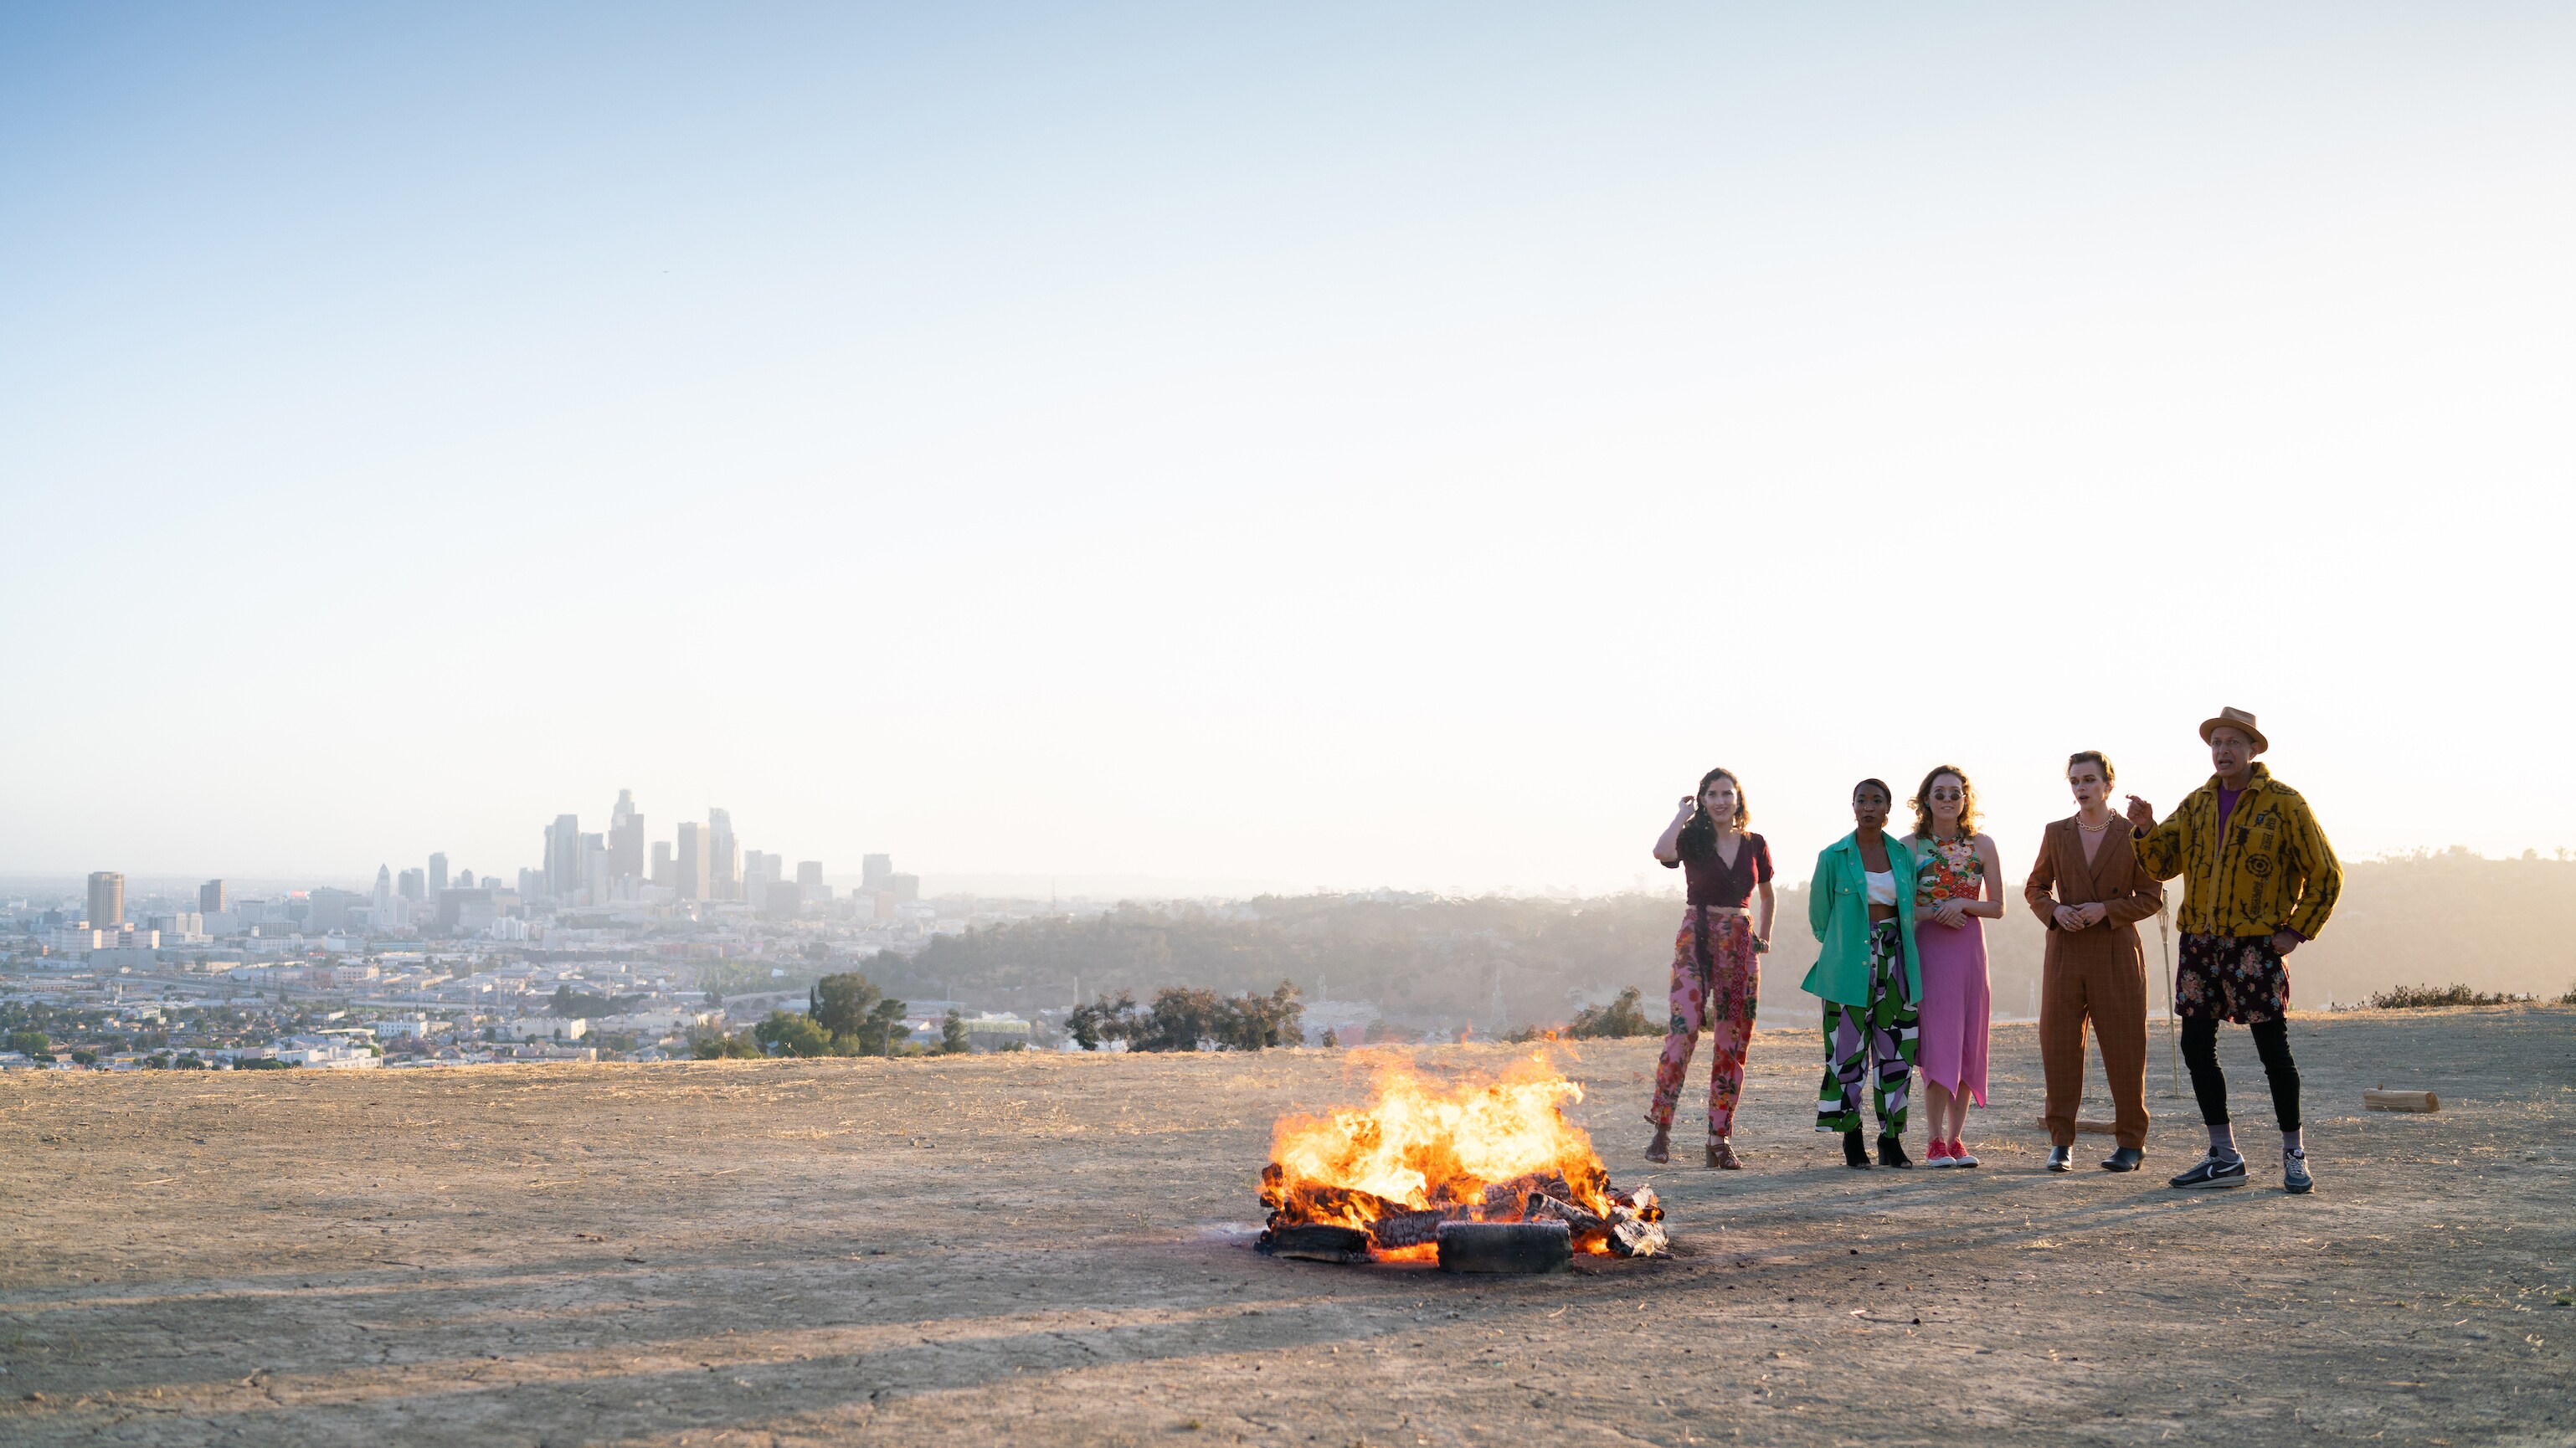 Los Angeles, CA - Jeff Goldblum (R) and firewalk participants gather around a fire. (Credit: National Geographic)